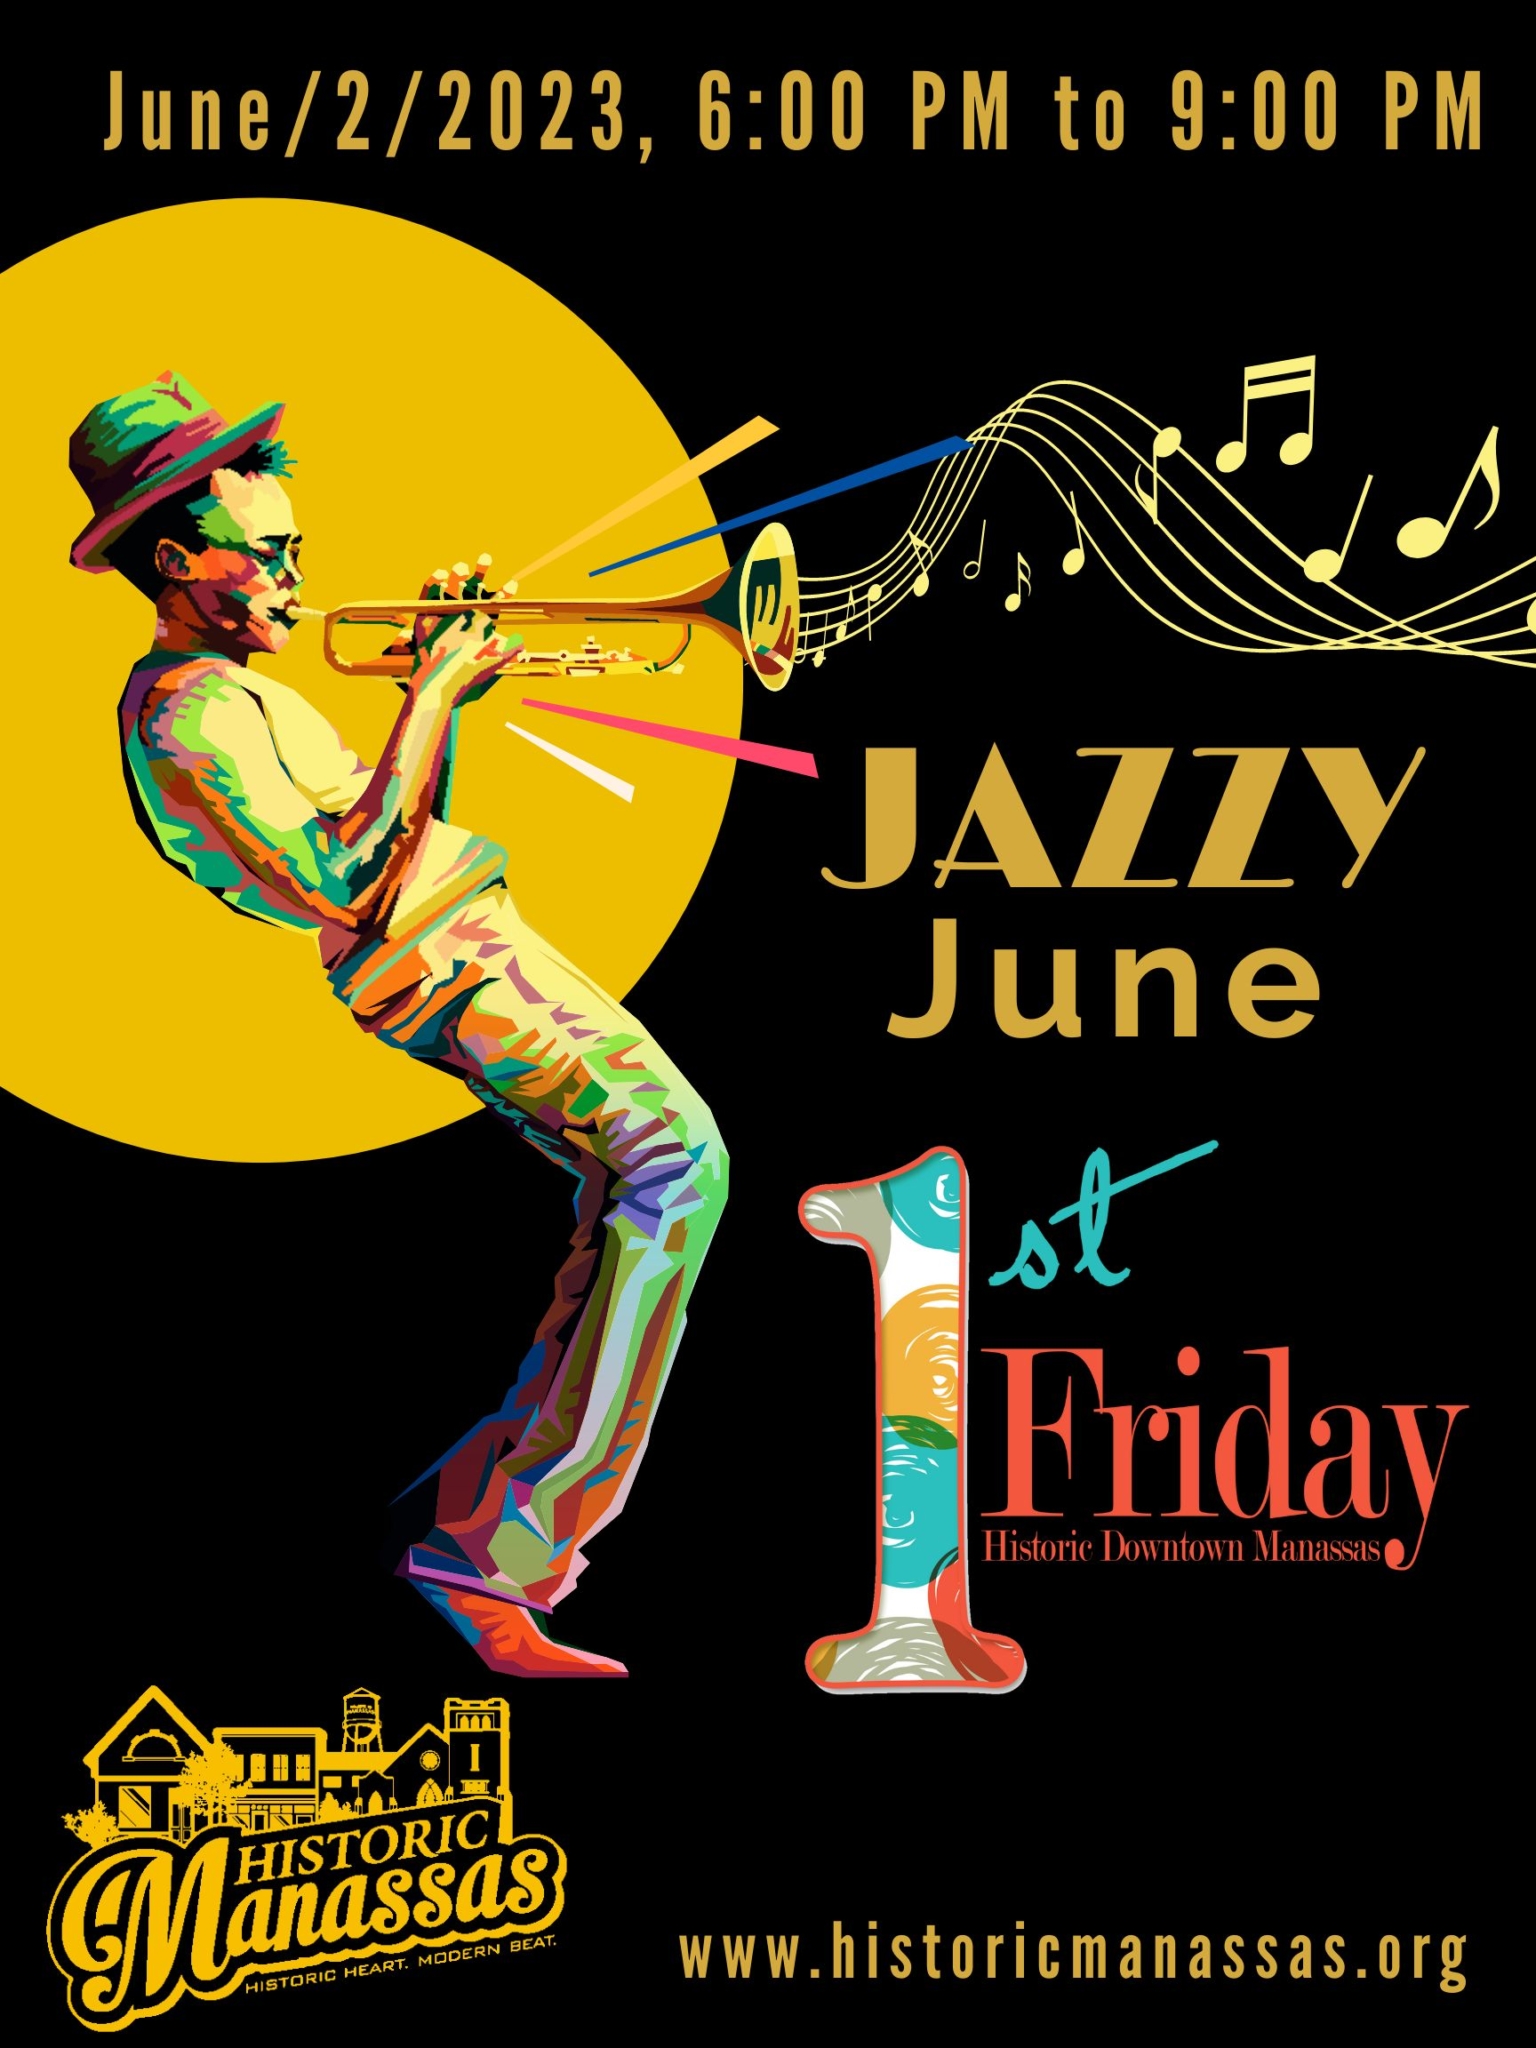 June First Friday: Jazzy June